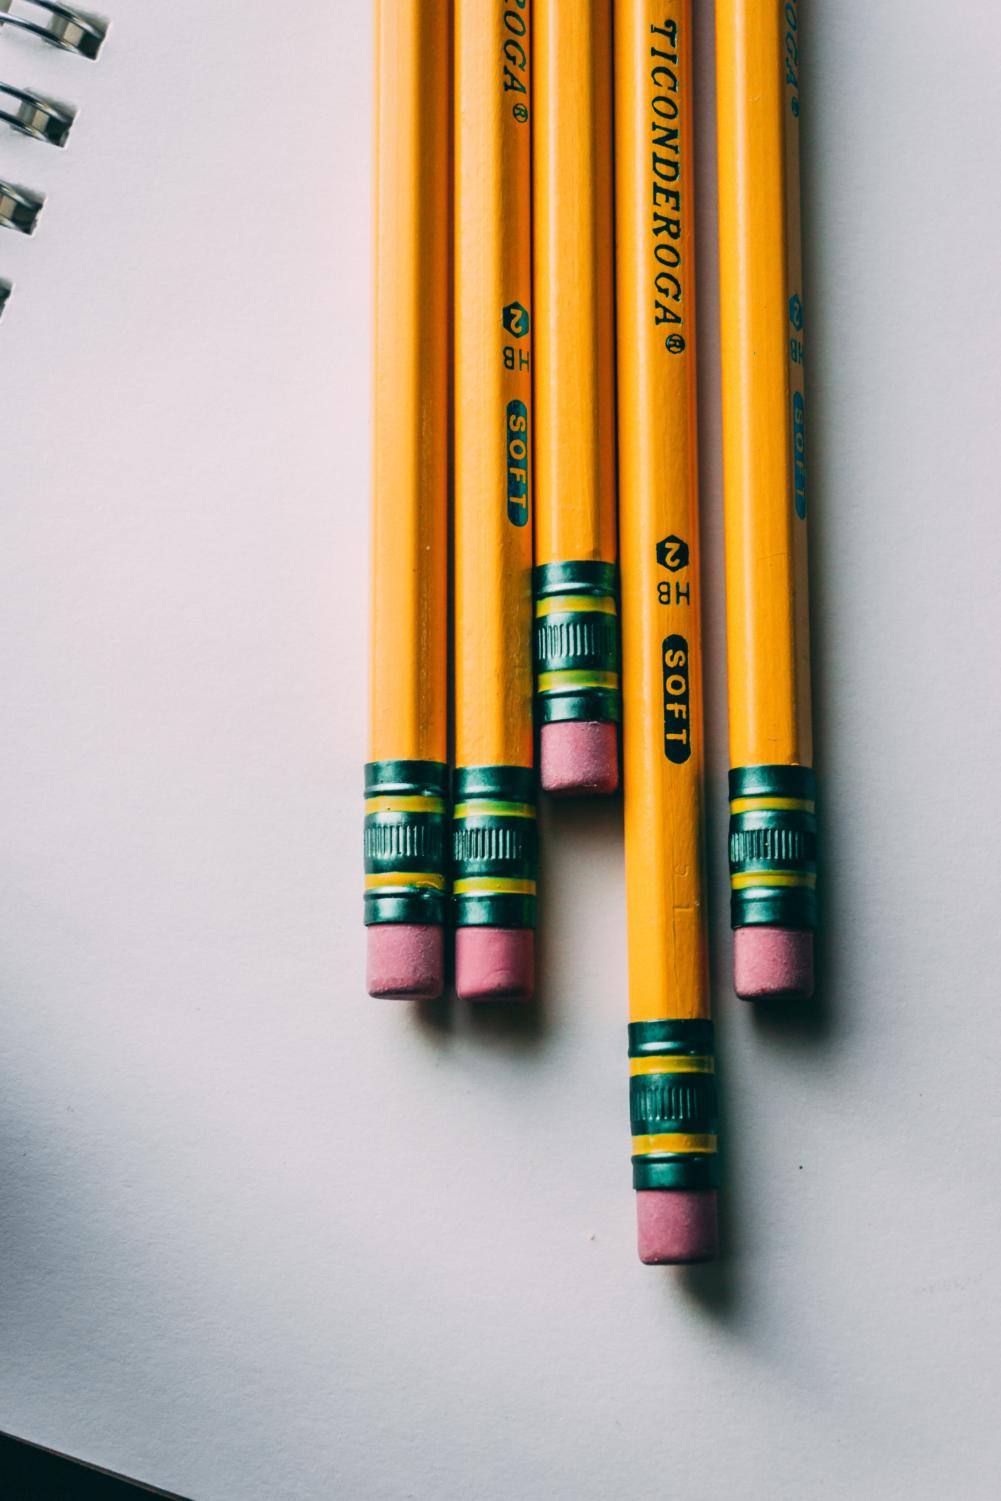 How Do Pencil Erasers Work?